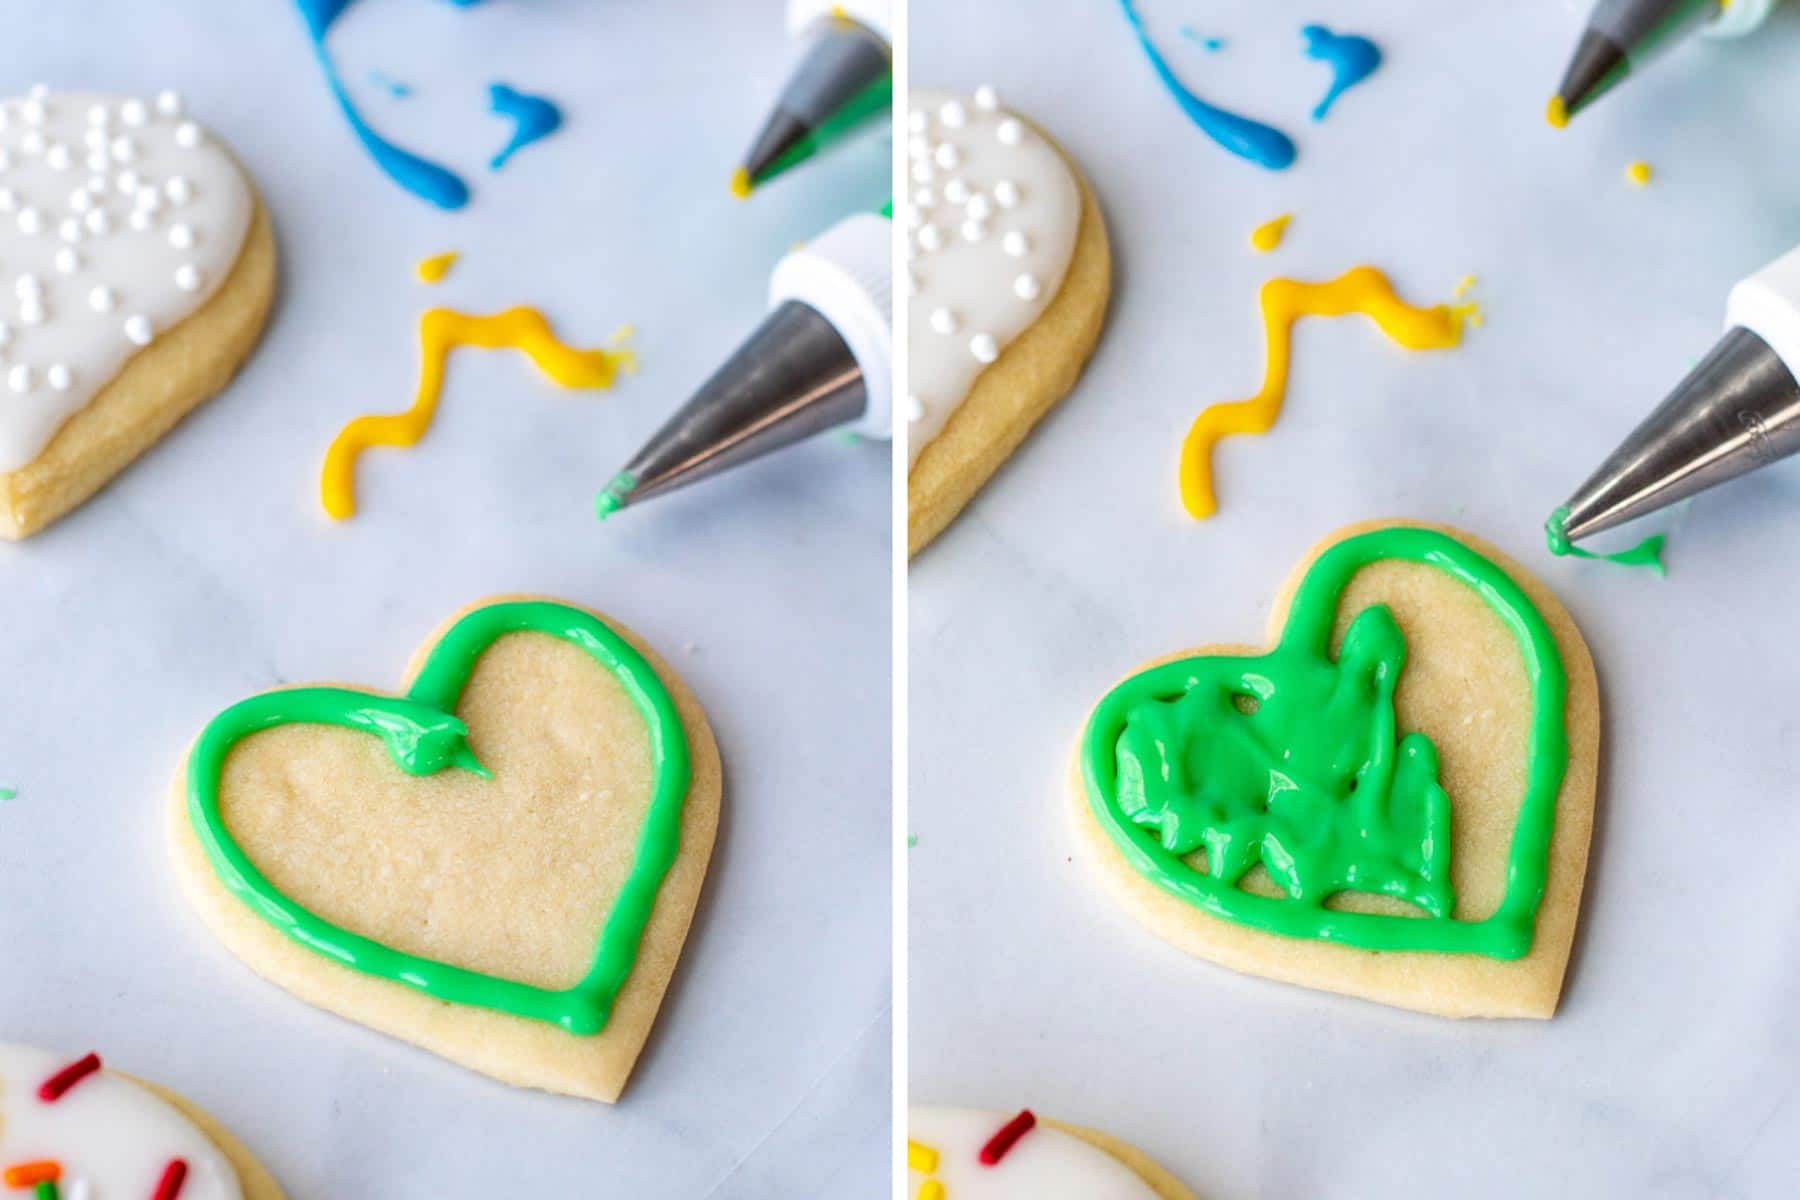 images showing how to decorate sugar cookies with icing